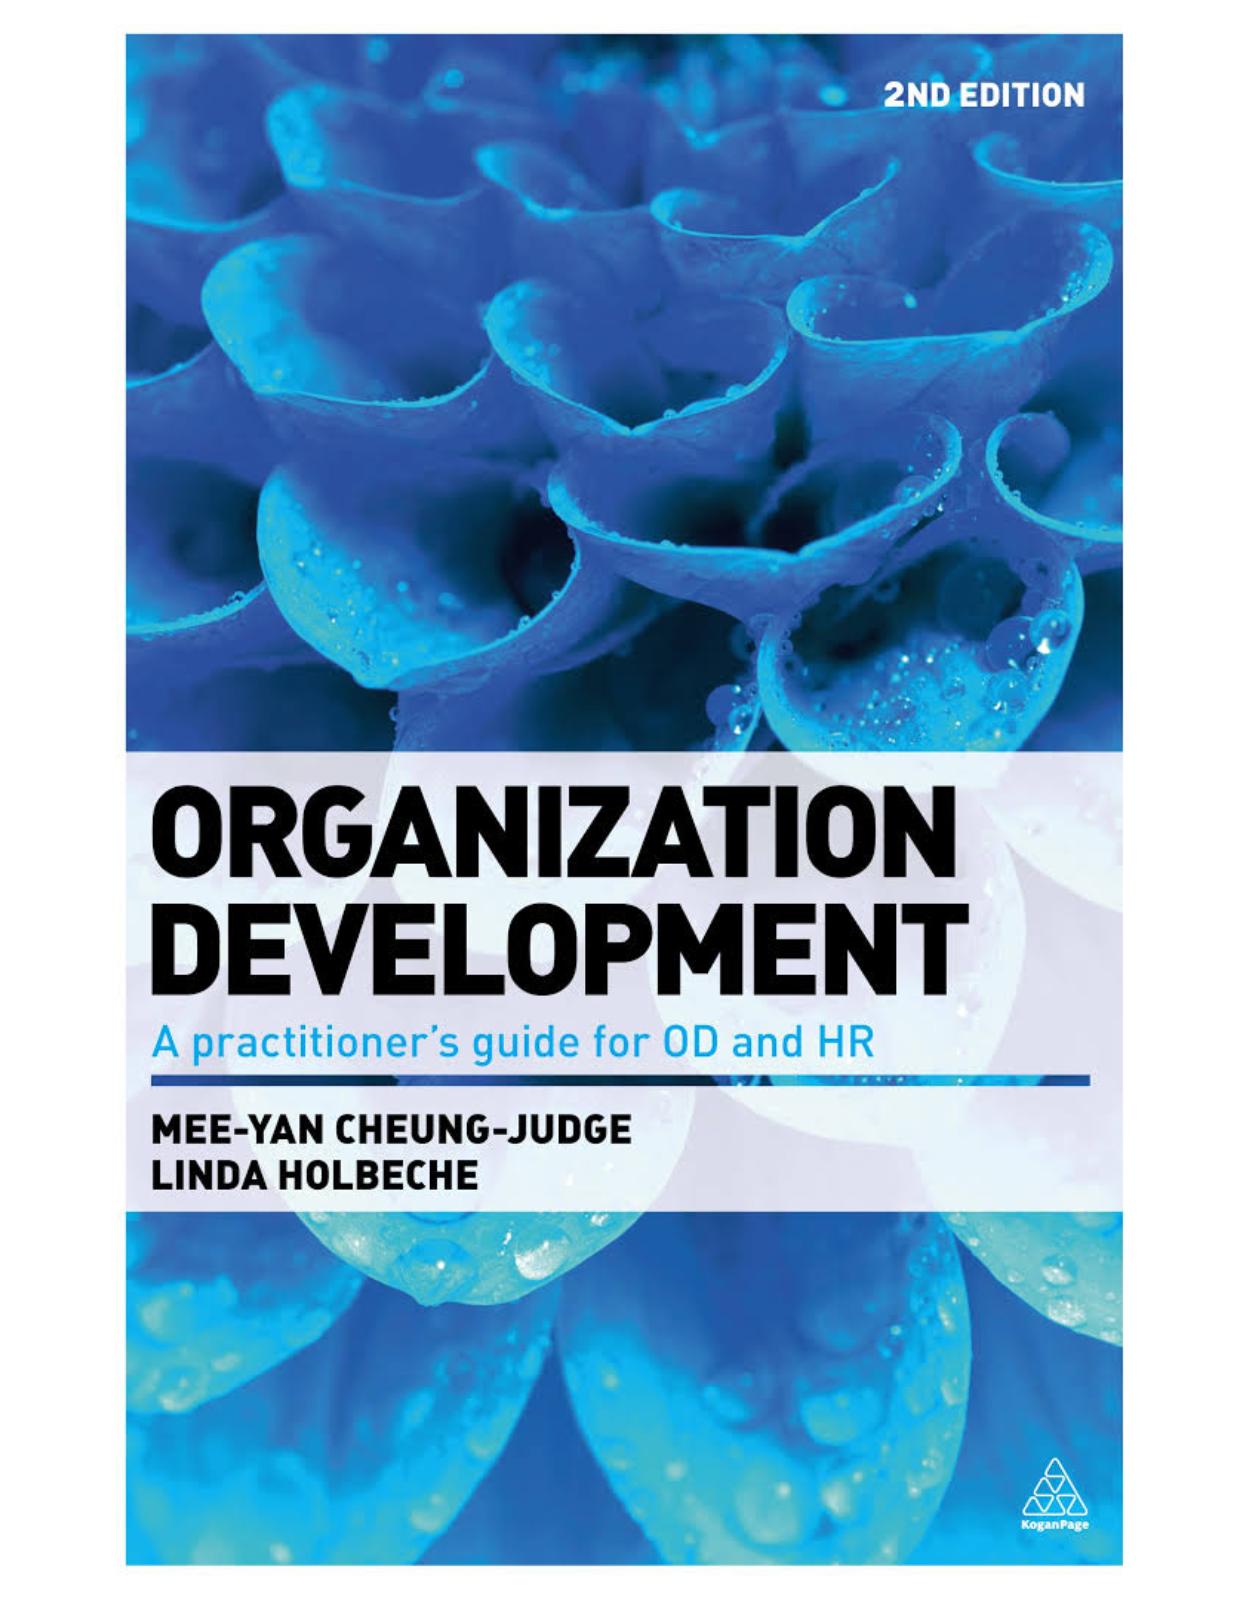 Organization Development A Practitioner's Guide to OD and HR